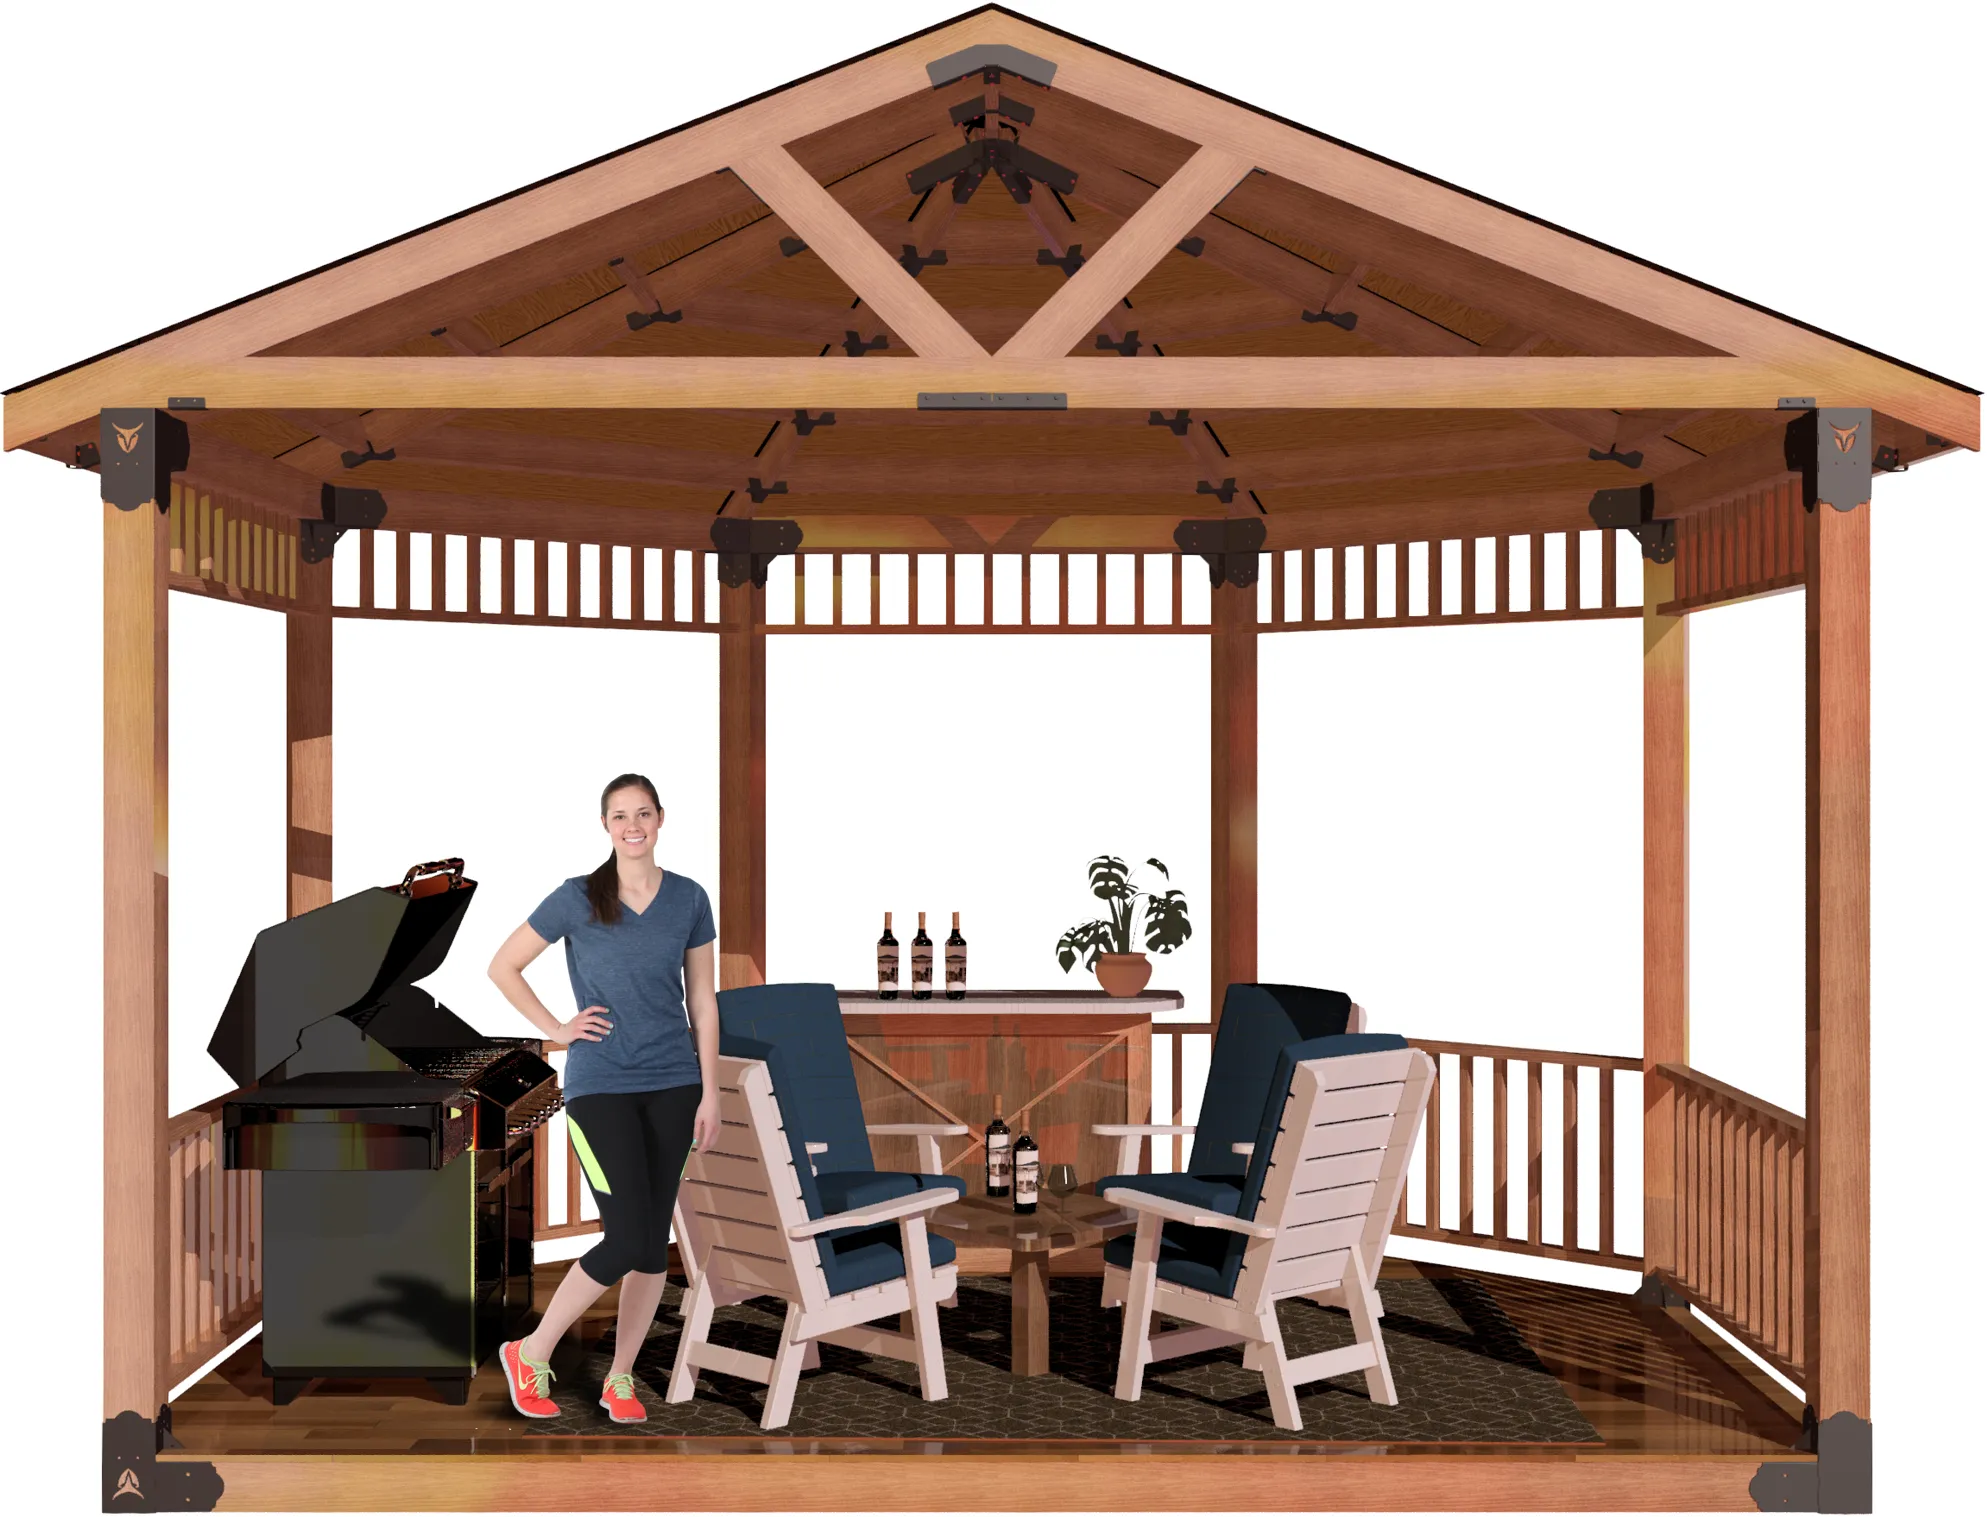 view of a DIY 6x6 solid roofed partial octagon gazebo. A bar with wine bottles, barbecuer, and casual furniture inside it and a girl standing and smiling inside it.